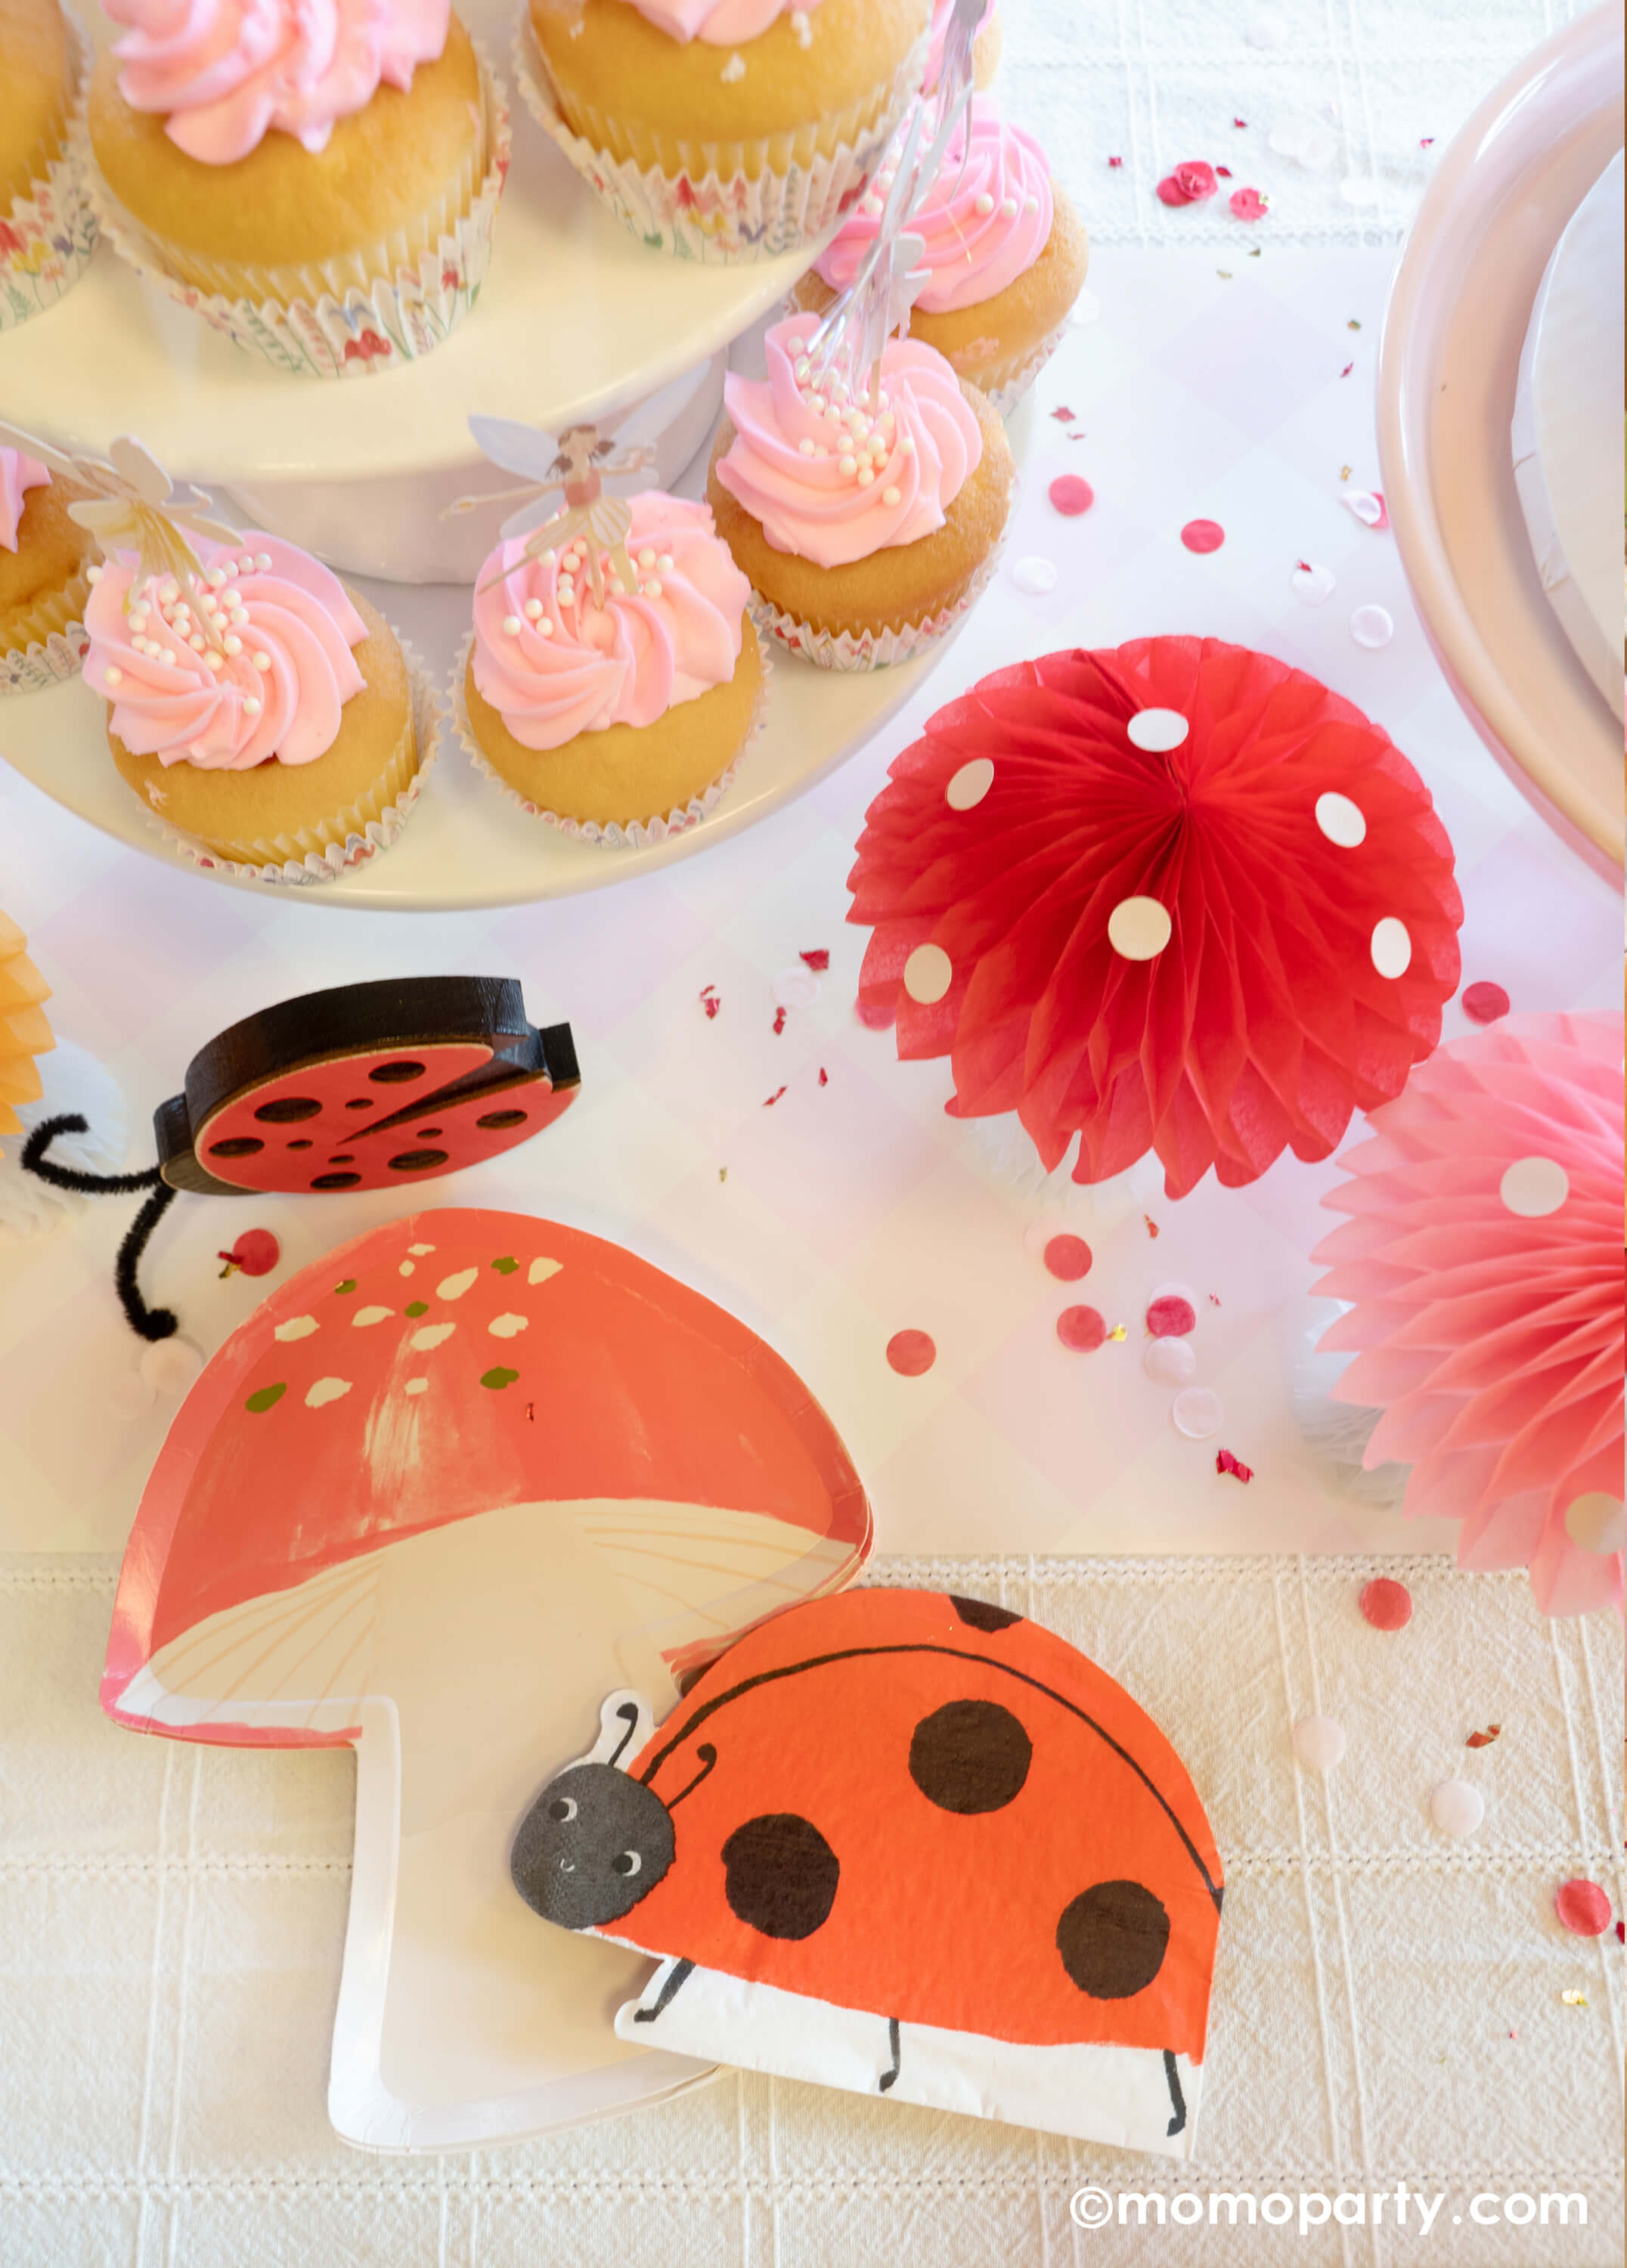 A spring fairy themed birthday party table featuring Momo Party's fairy mushroom shaped plate by Meri Meri, ladybug shaped napkin, mushroom honeycomb decoration next to pink cupcakes topped with Momo Party's fairy cupcake toppers by Meri Meri, all makes a great inspo for a spring inspired party or girl's birthday celebration. 